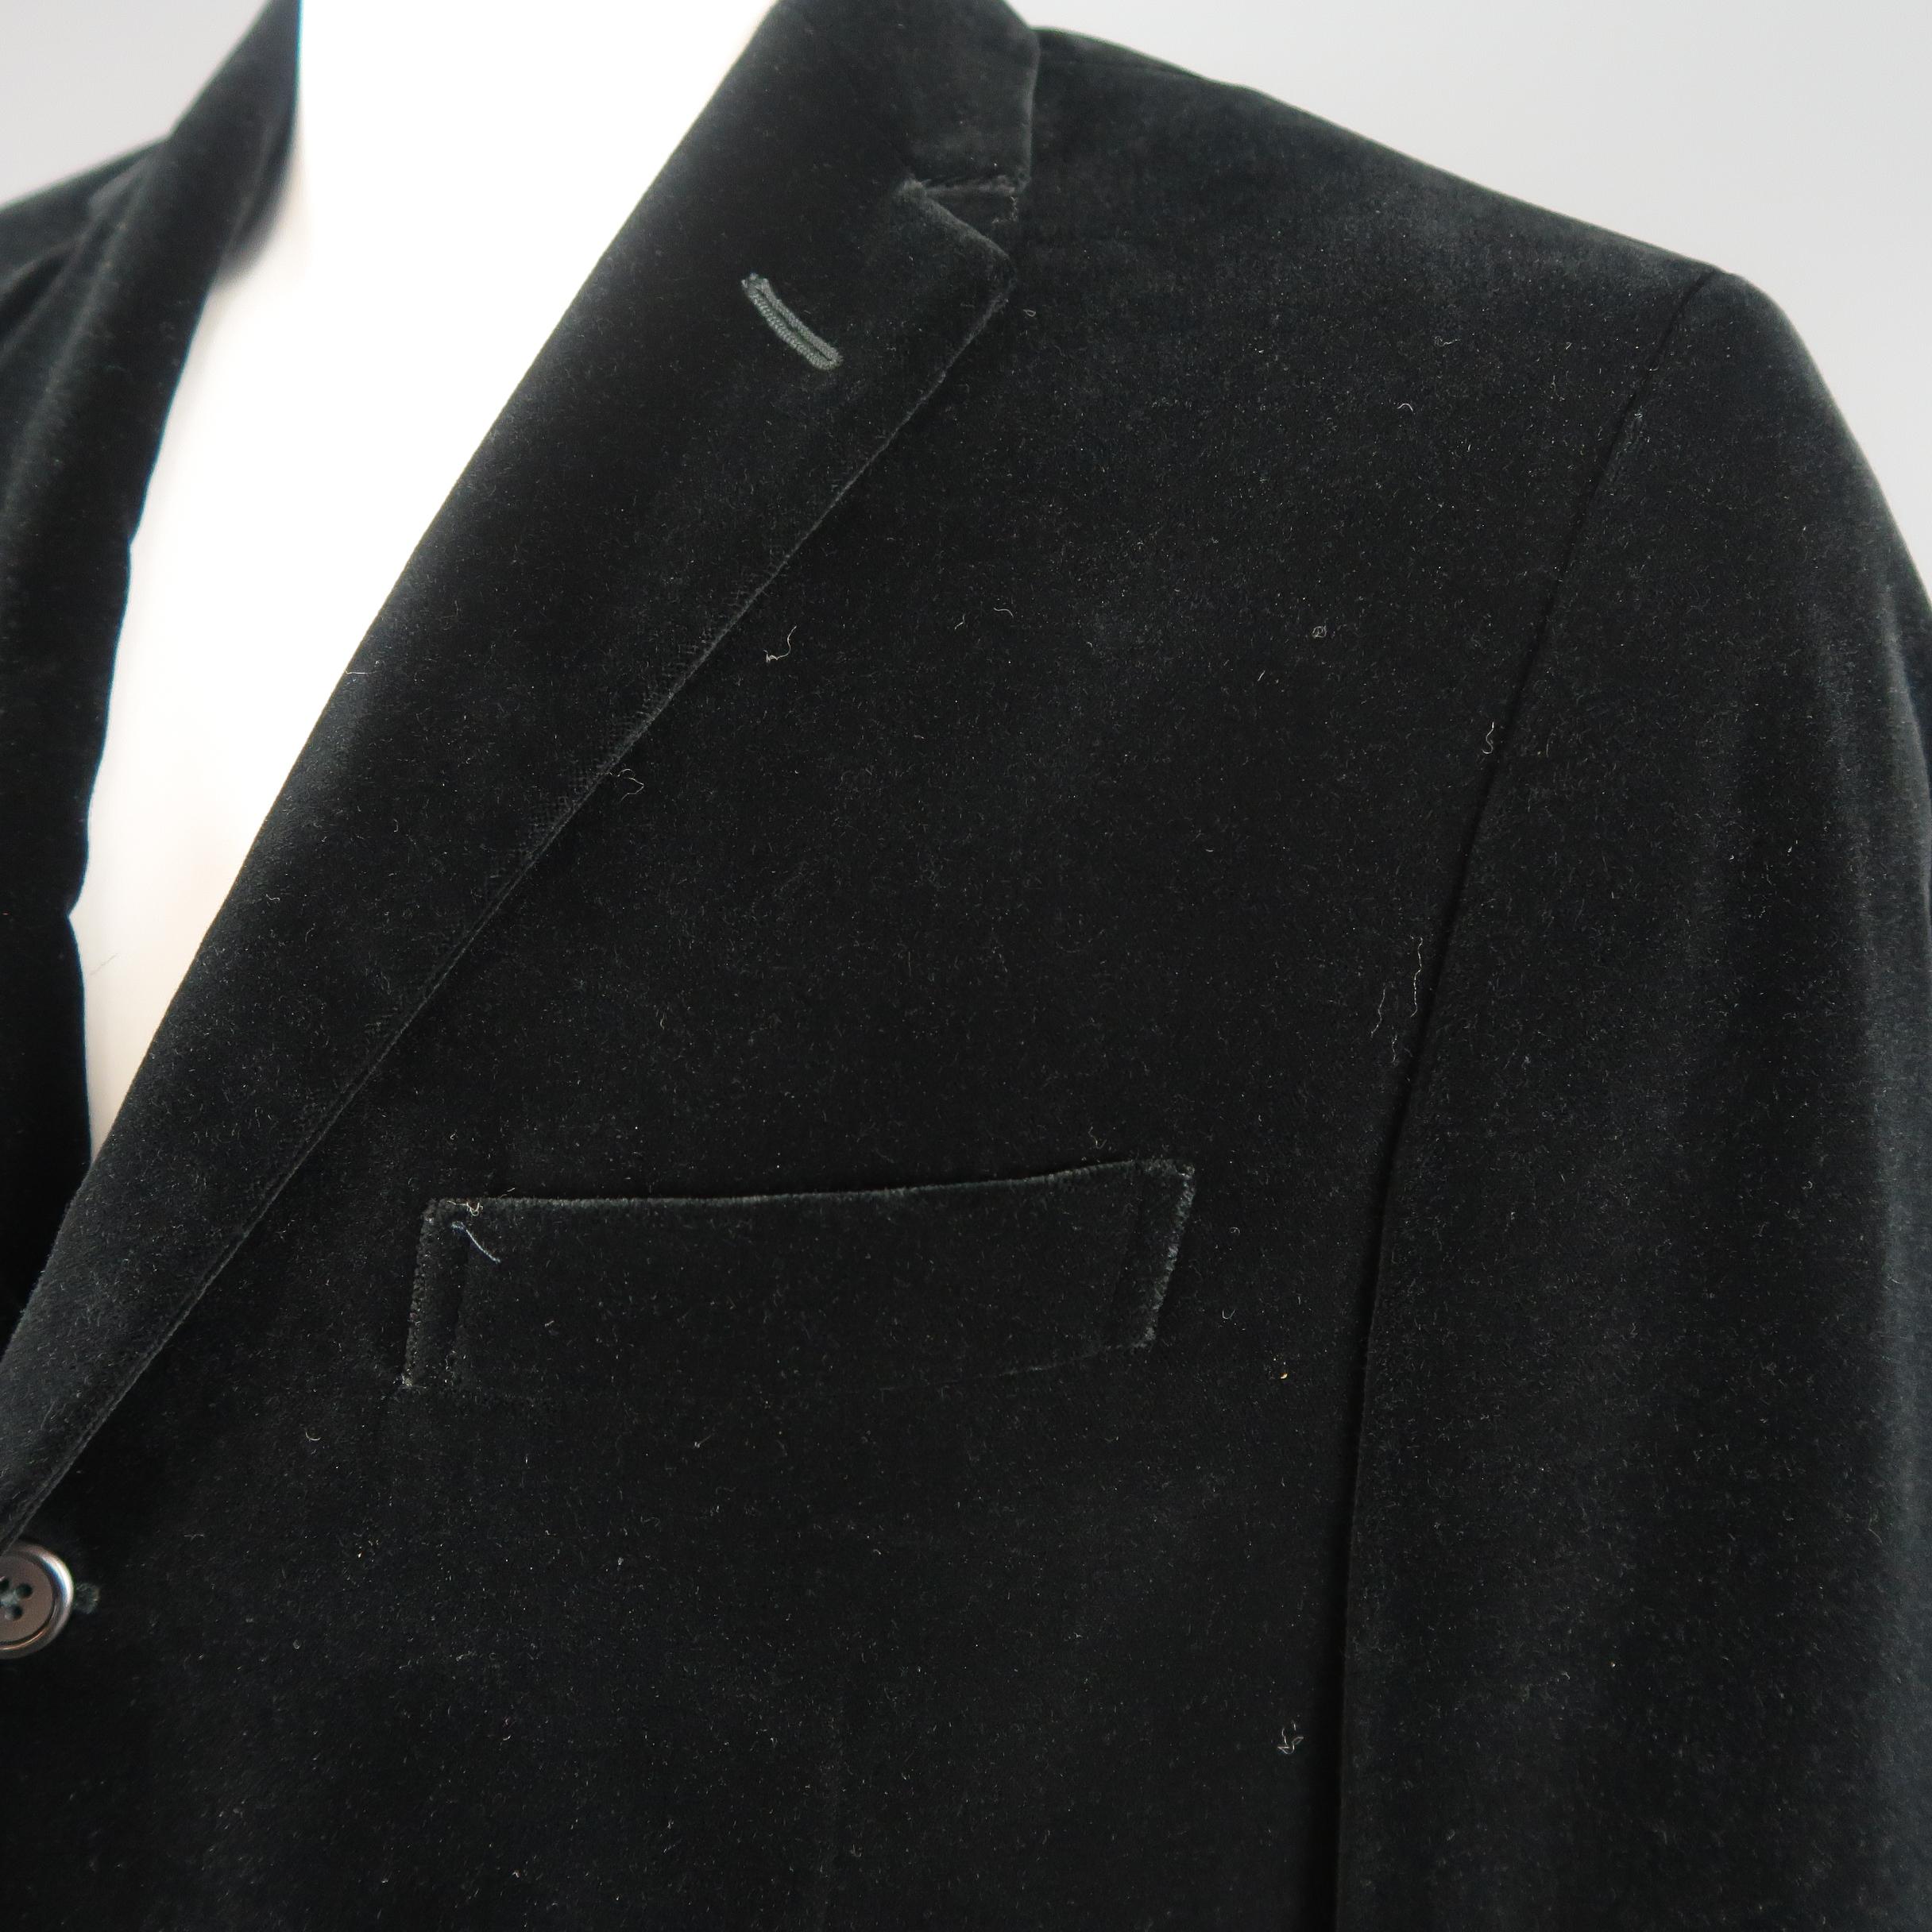 Single breasted POLO RALPH LAUREN sport coat jacket comes in black cotton velvet with a notch lapel, three button front, and flap pockets. Spot by right pocket. Made in Italy.
 
Good Pre-Owned Condition.
Marked: 44 L
 
Measurements:
 
Shoulder: 18